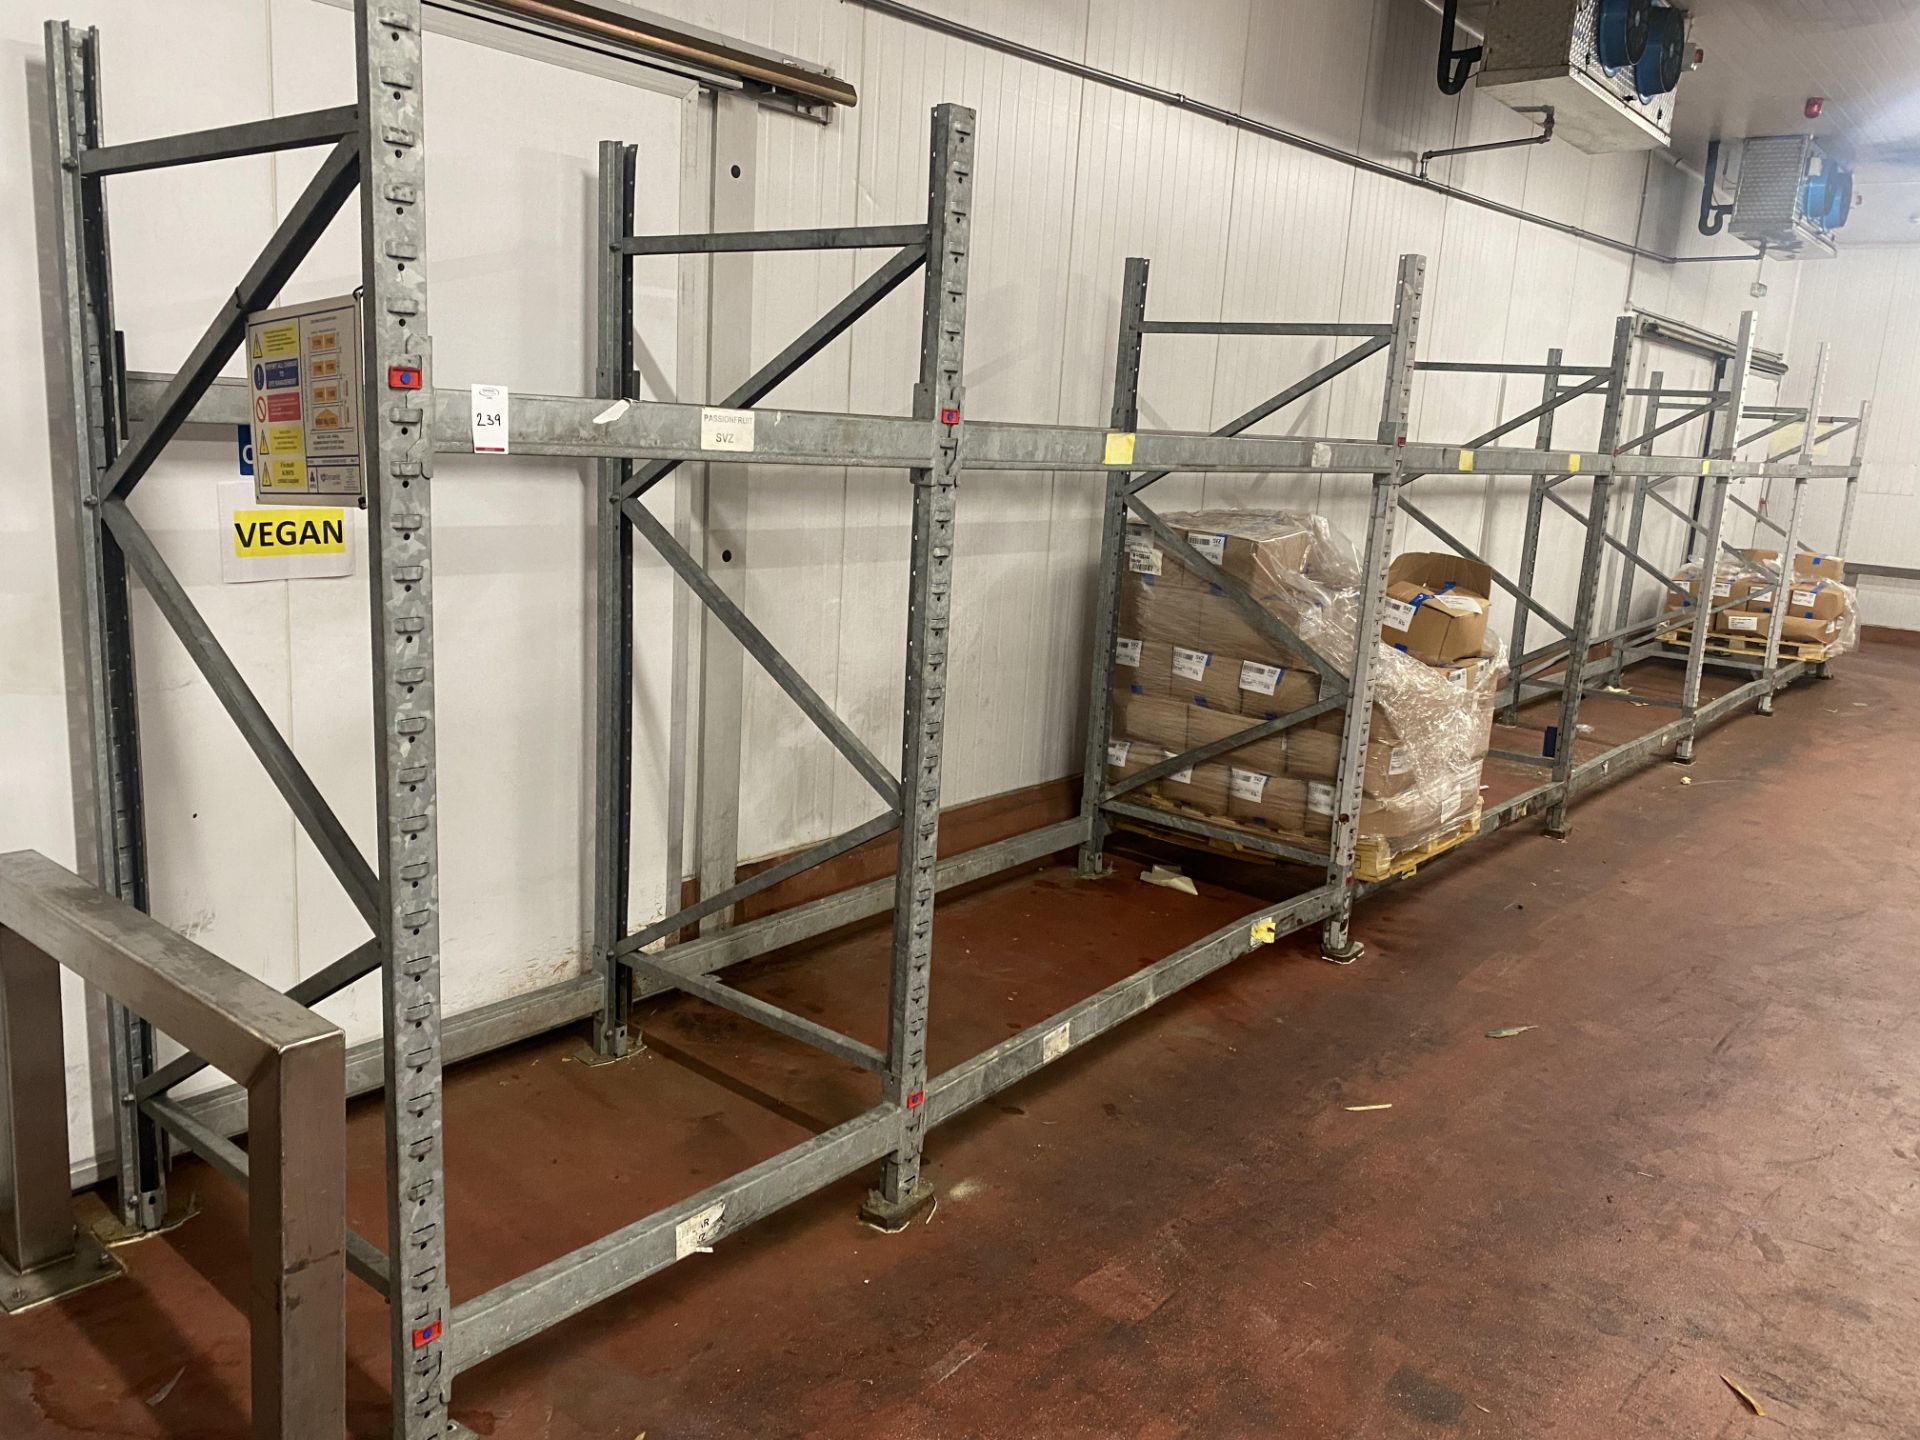 8 Bays of heavy duty racking (located in Factory 1)